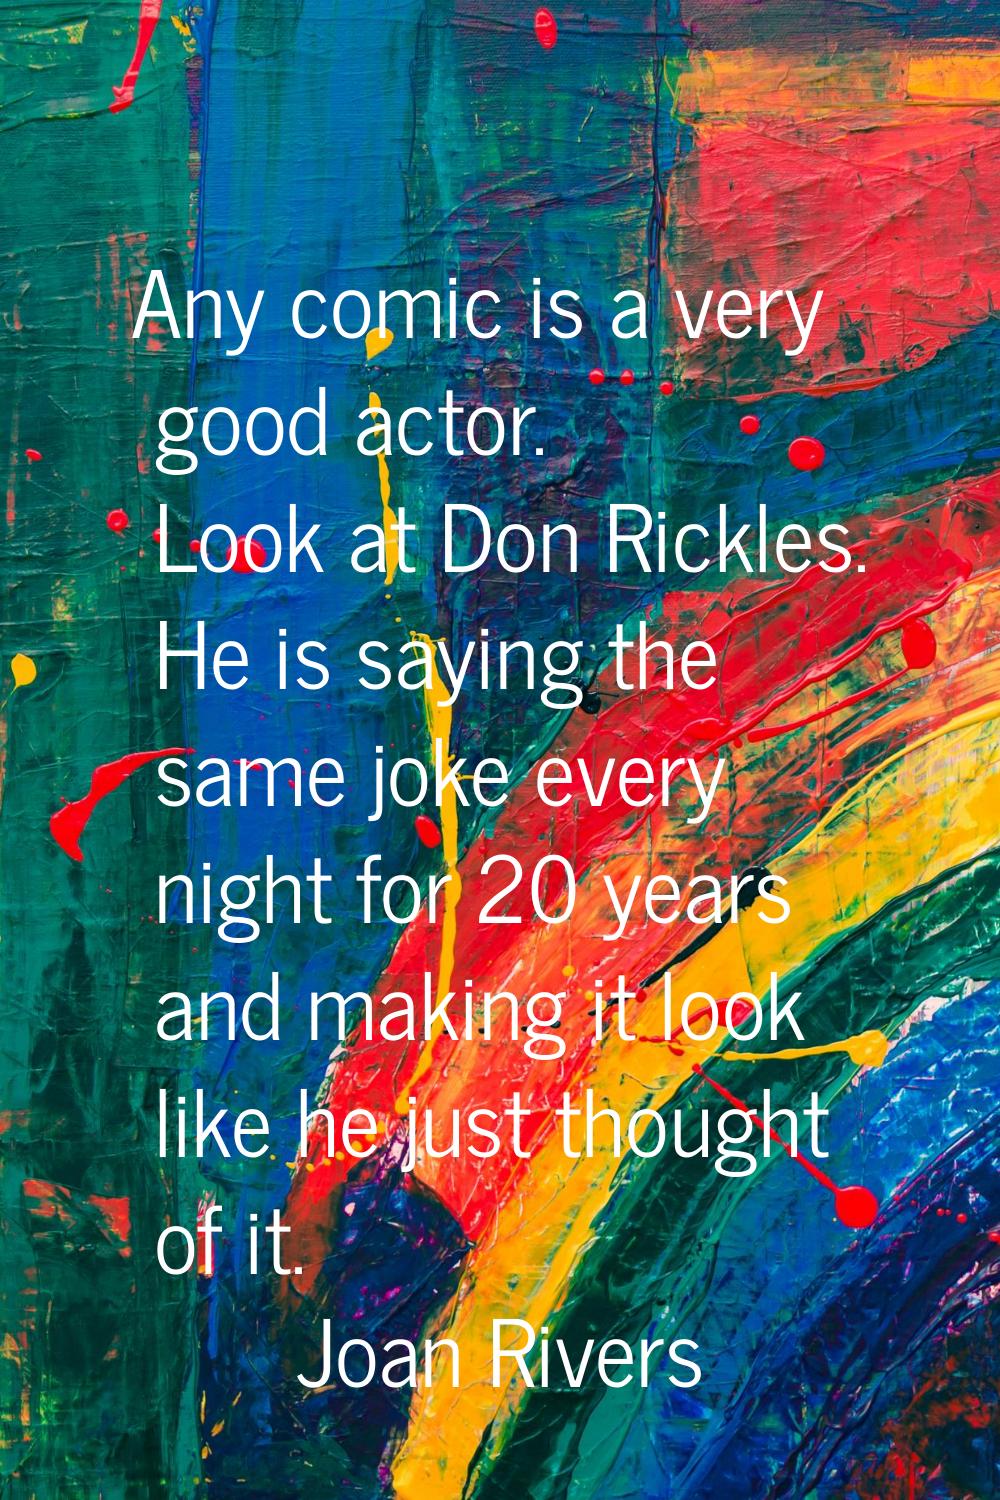 Any comic is a very good actor. Look at Don Rickles. He is saying the same joke every night for 20 